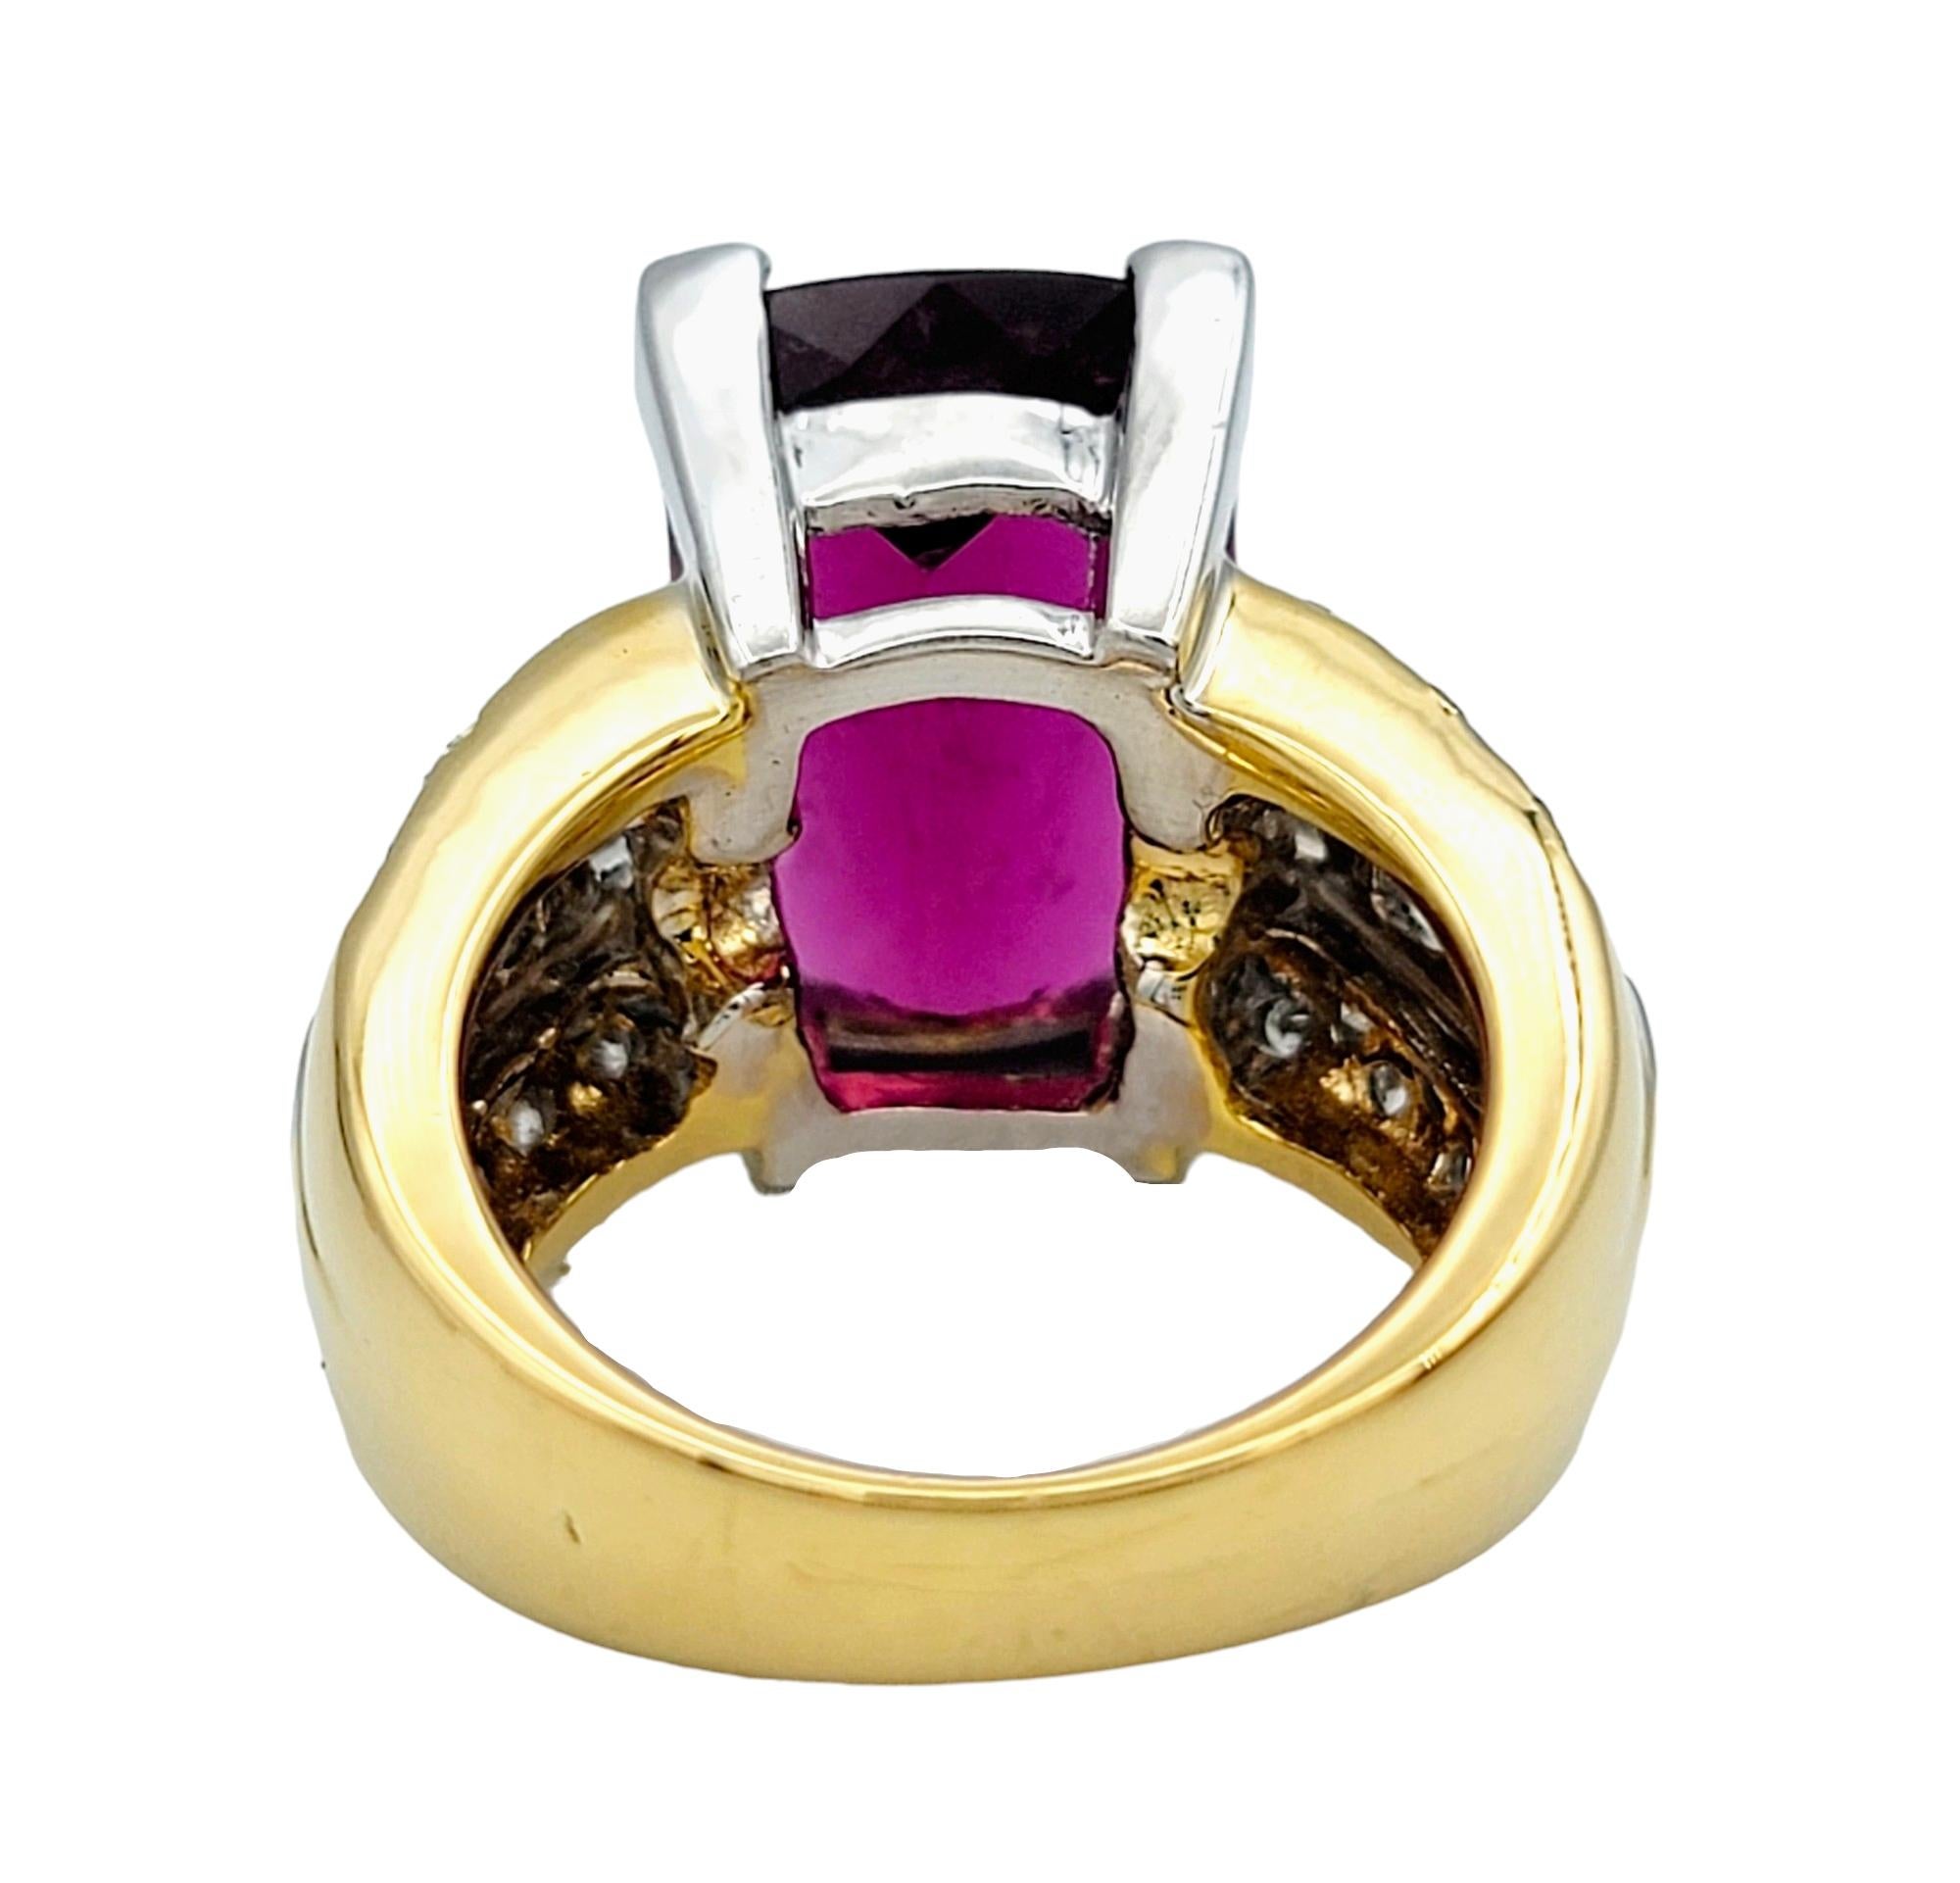 Pink Tourmaline and Diamond Cocktail Ring in 18 Karat Yellow Gold and Platinum In Good Condition For Sale In Scottsdale, AZ